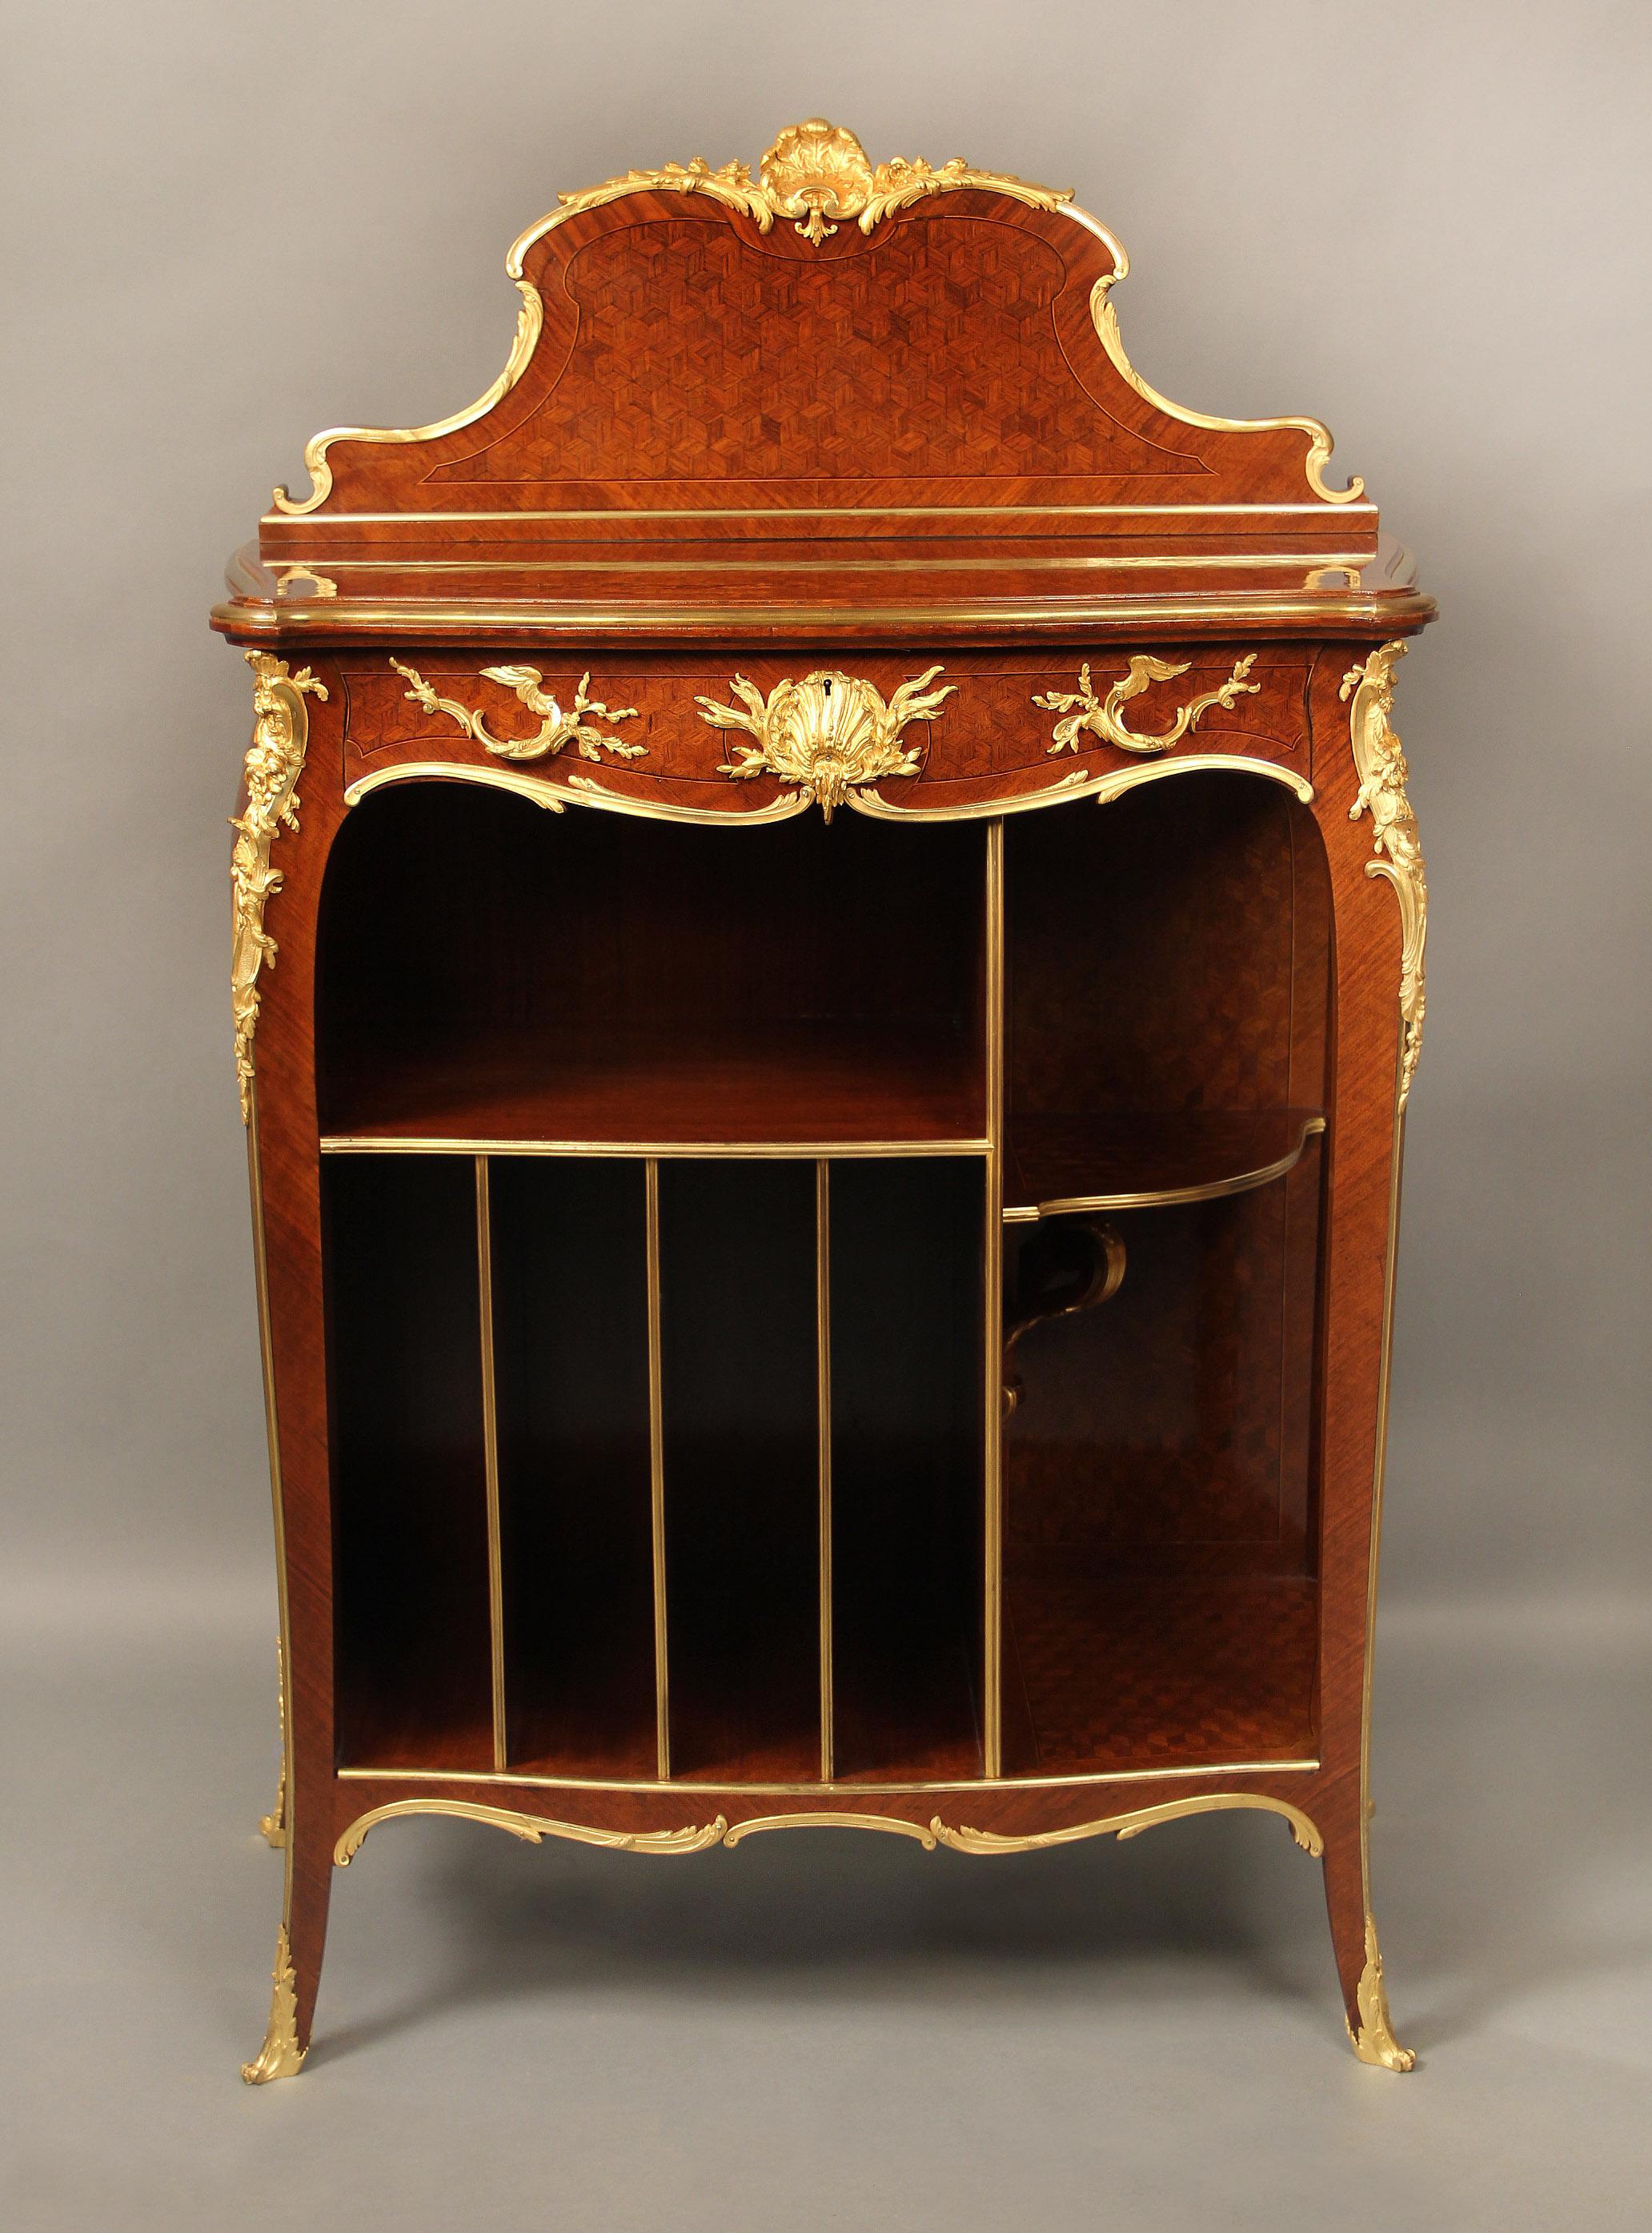 A unique late 19th century gilt bronze mounted parquetry cabinet by François Linke and Léon Messagé

François Linke and Léon Messagé

This unusual cabinet features a cube parquetry top with a back splash centered with a plume of bronze feathers